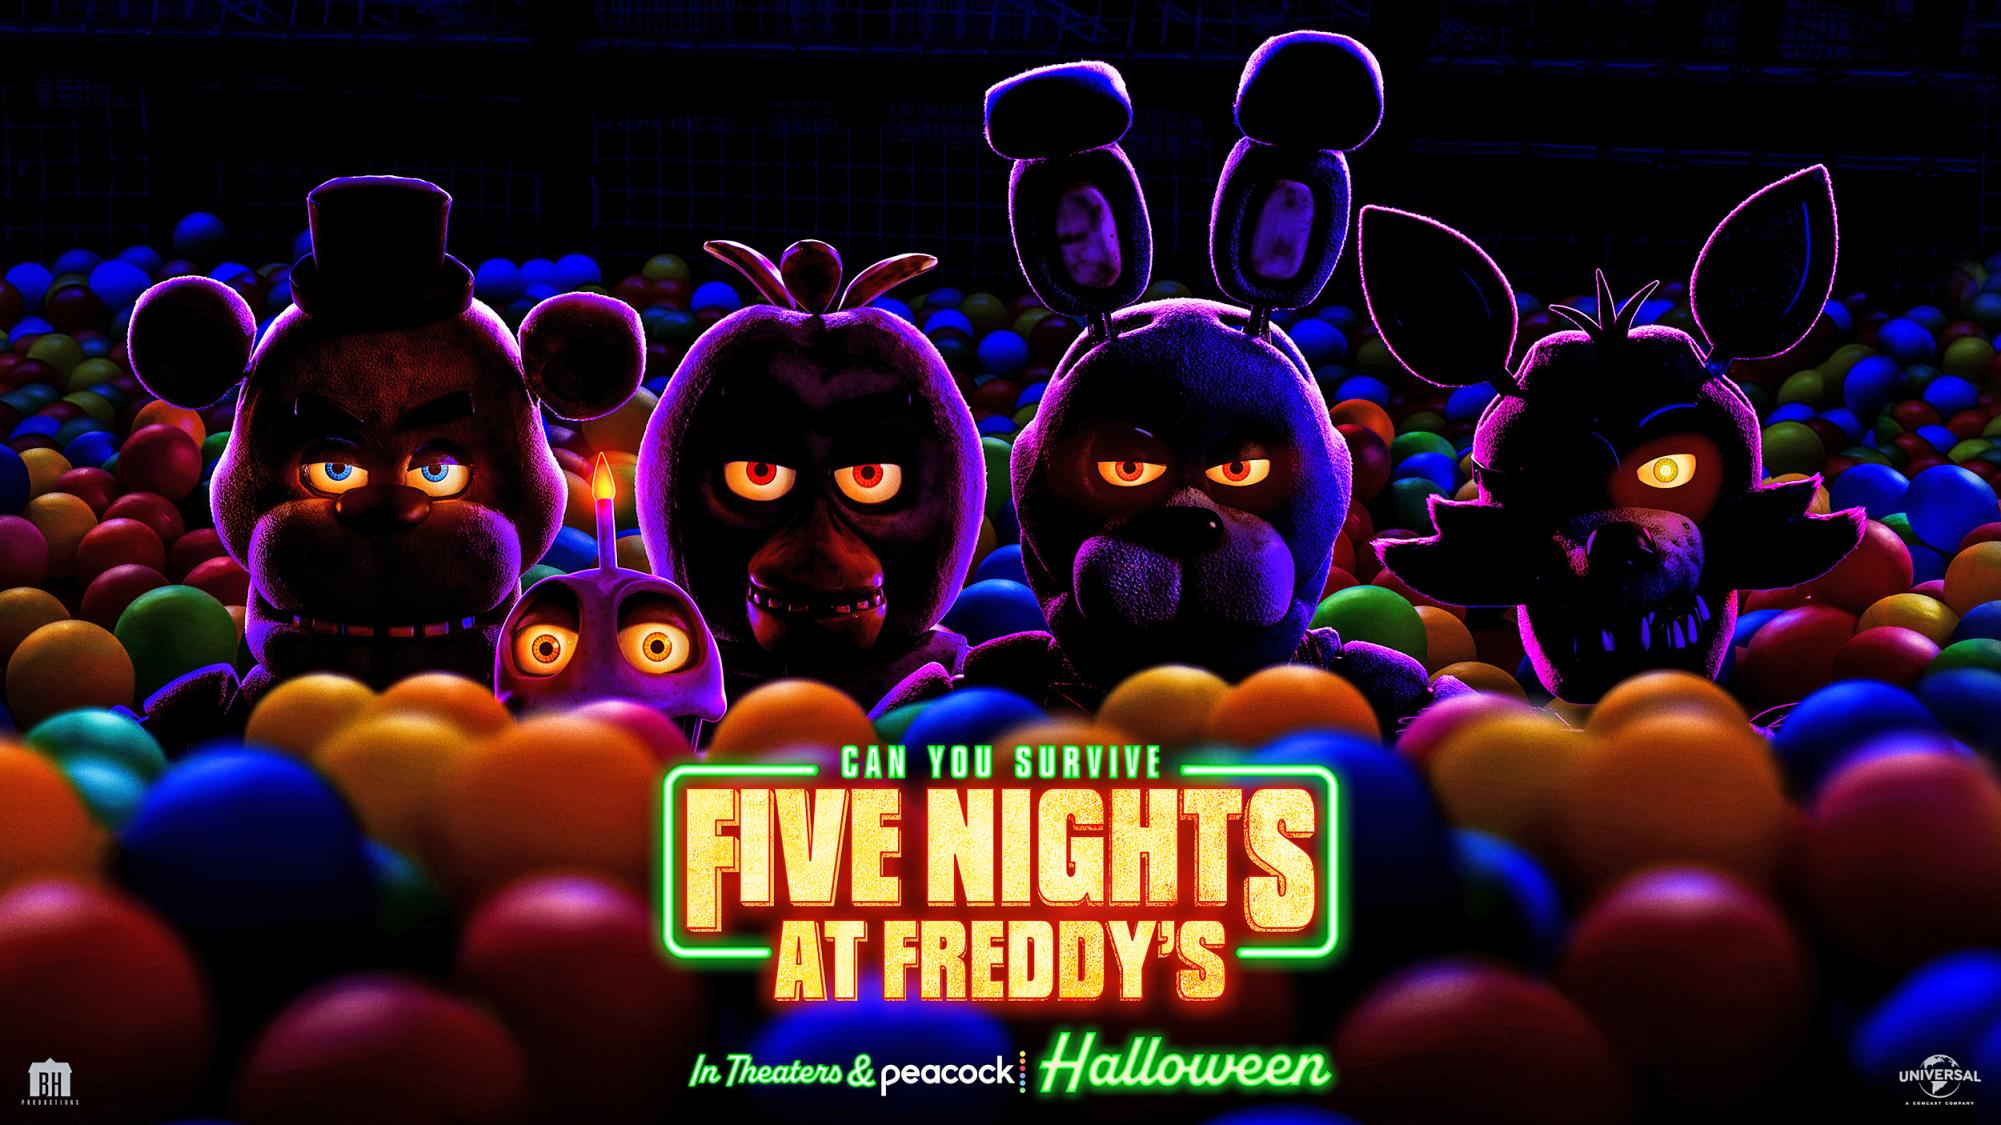 A poster for the “Five Nights at Freddy’s” movie.